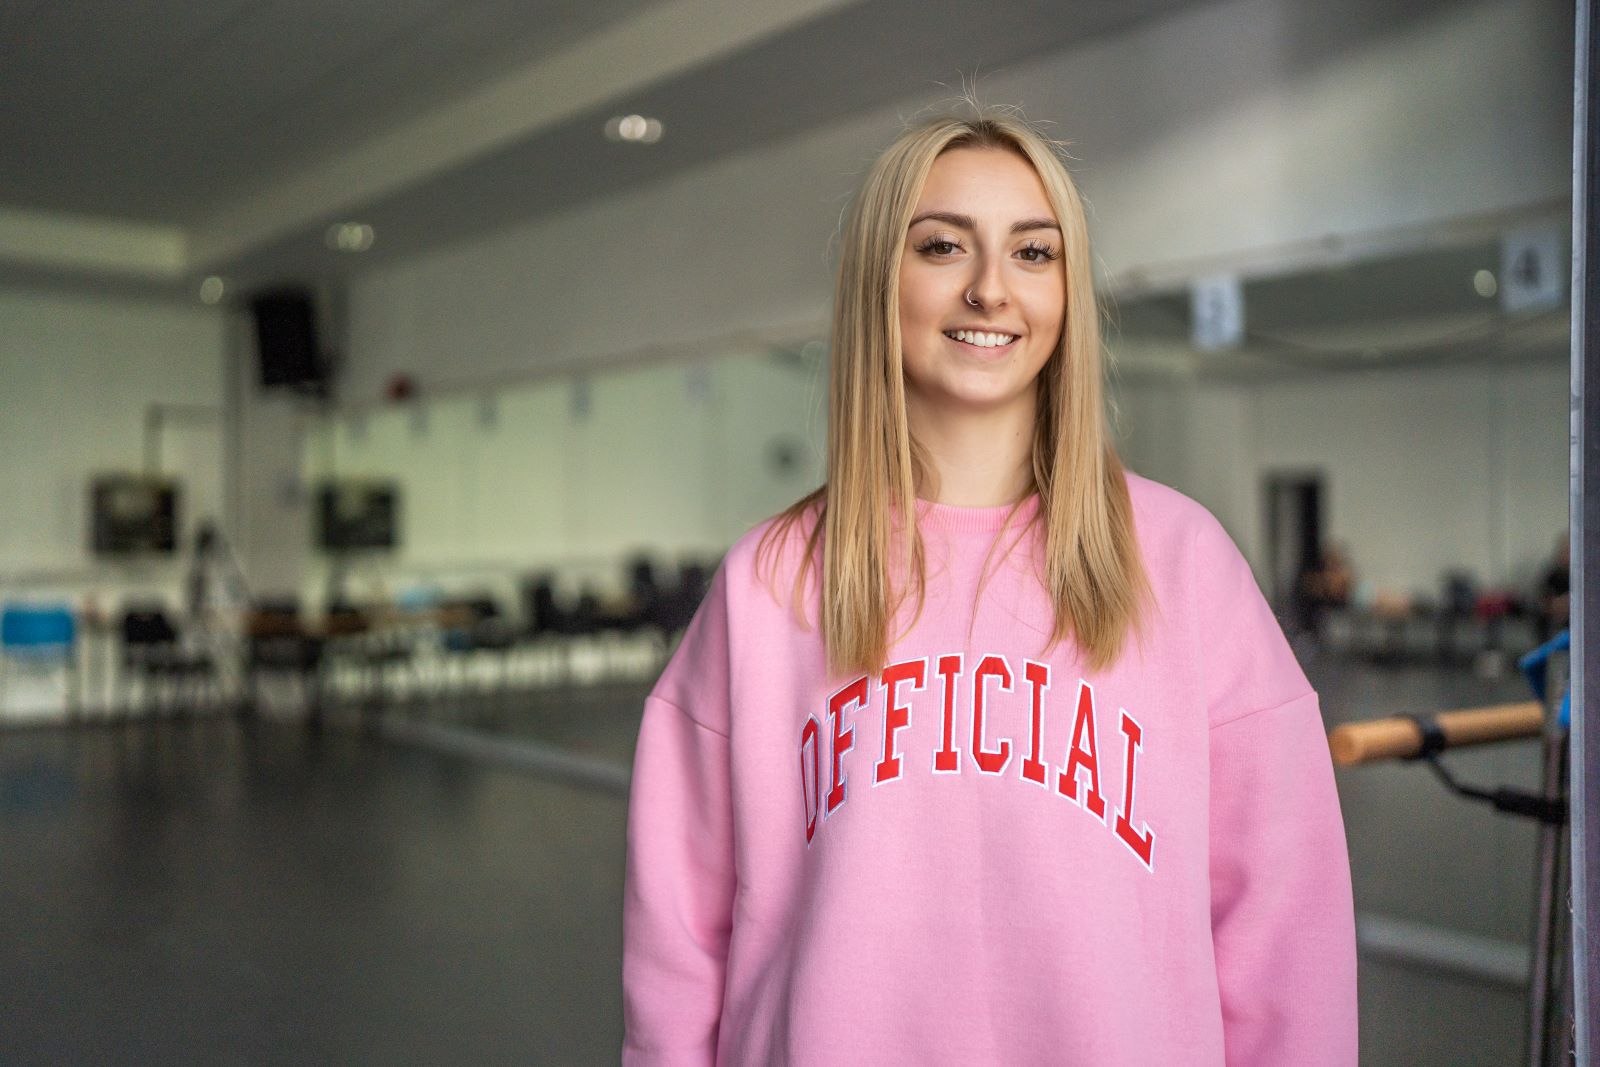 Female Dance student in pink jumpersmiling at the camera